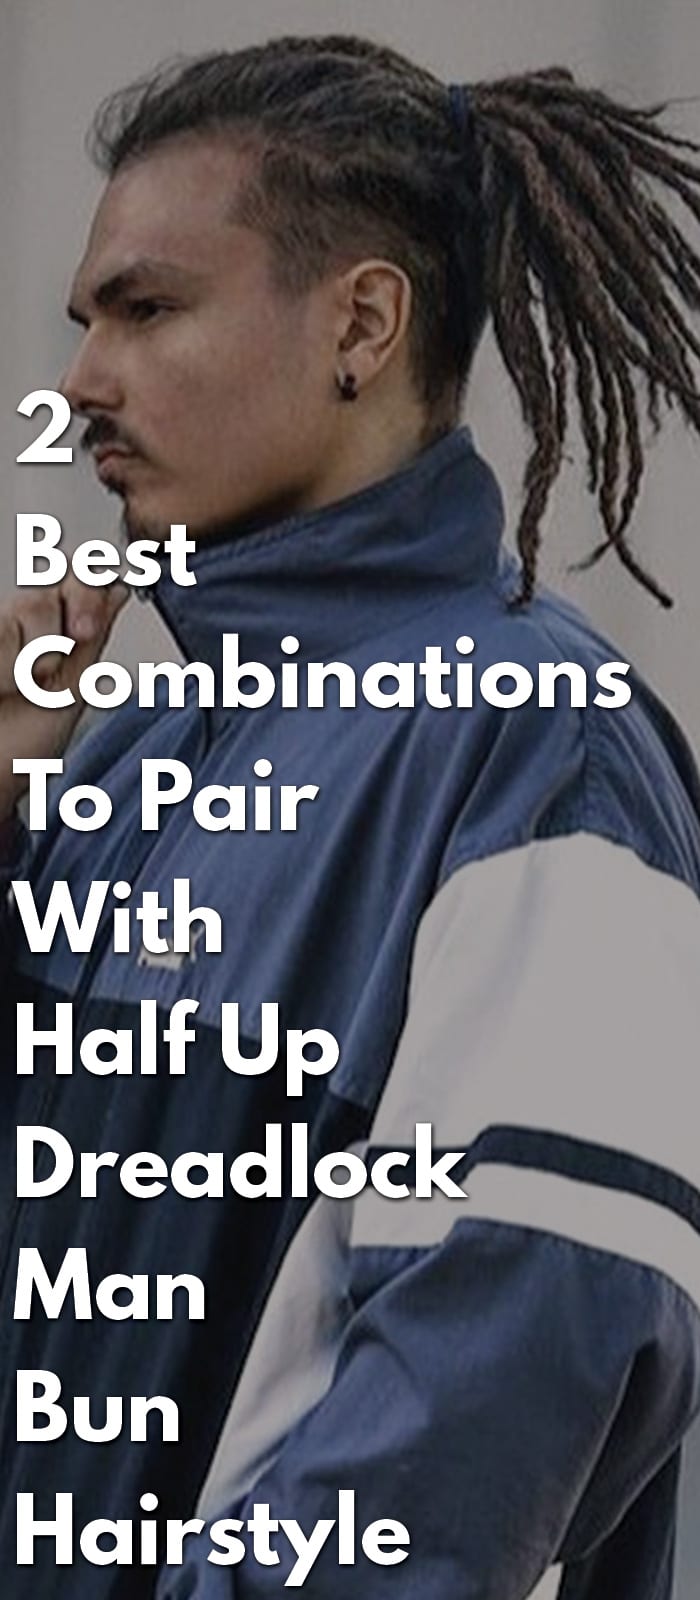 2 Best Combinations To Pair With Half Up Dreadlock Man Bun Hairstyle